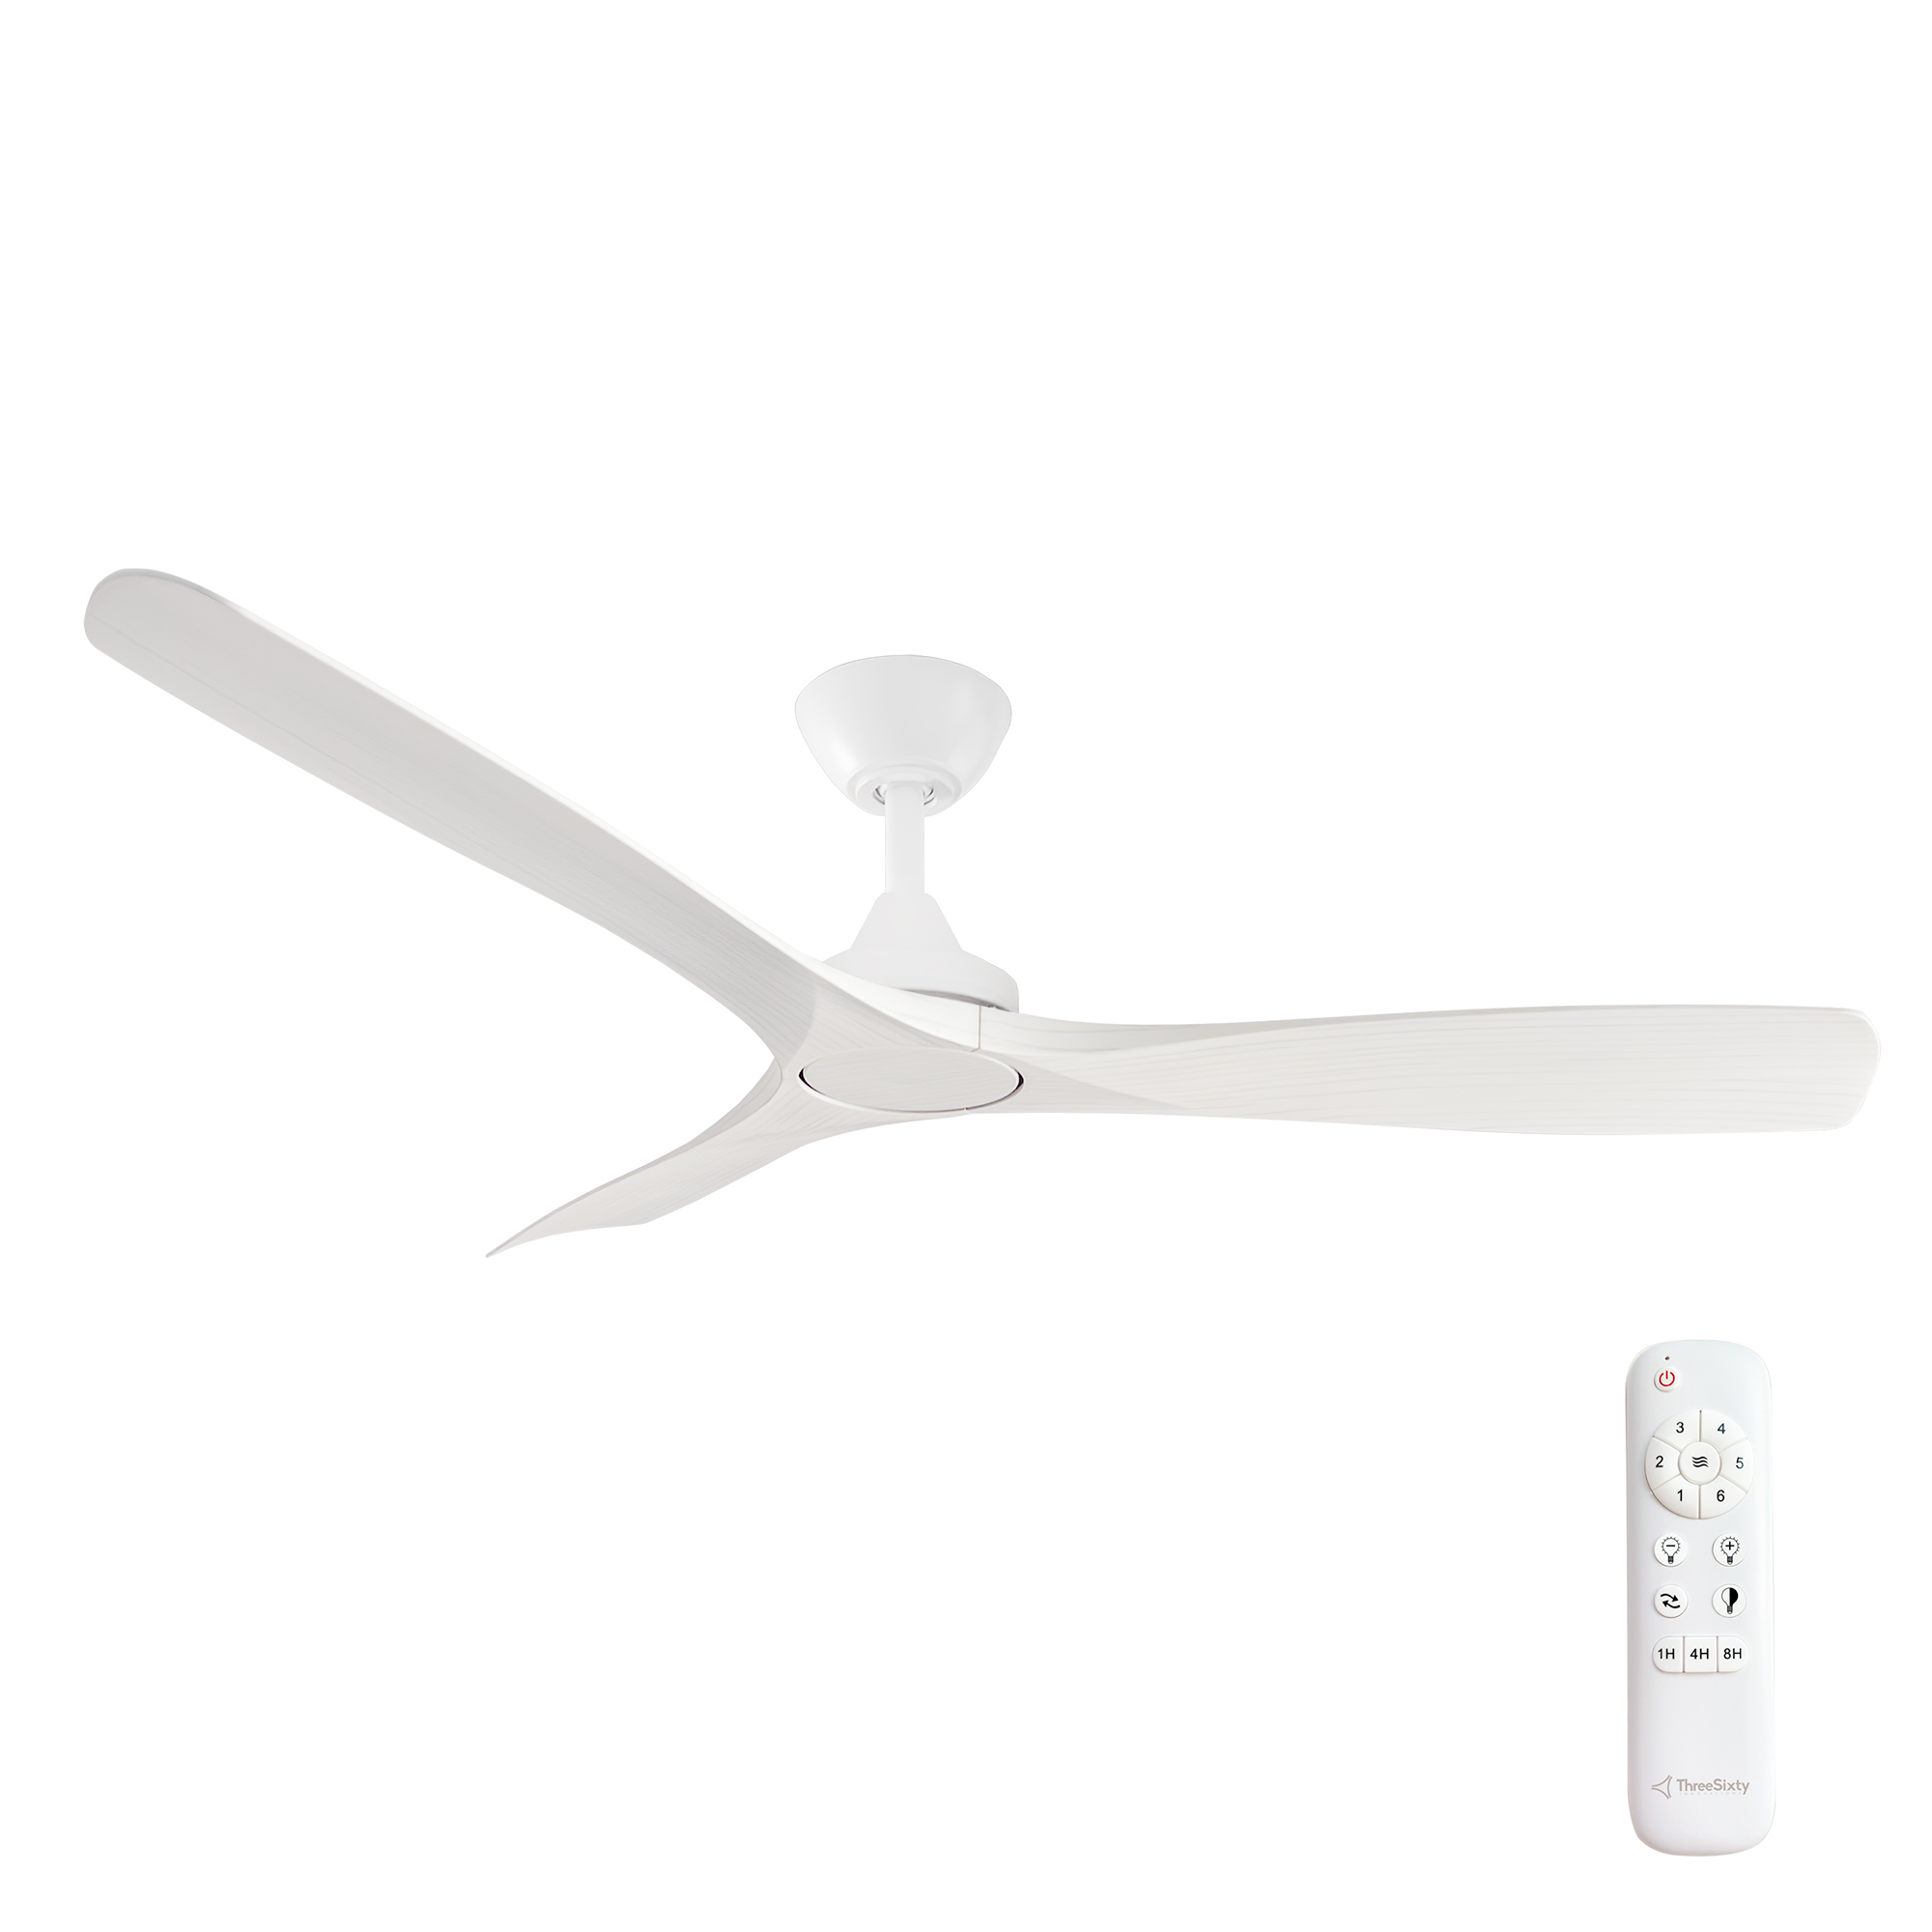 52" Spitfire DC Ceiling Fan in Matte White with White Wash blades